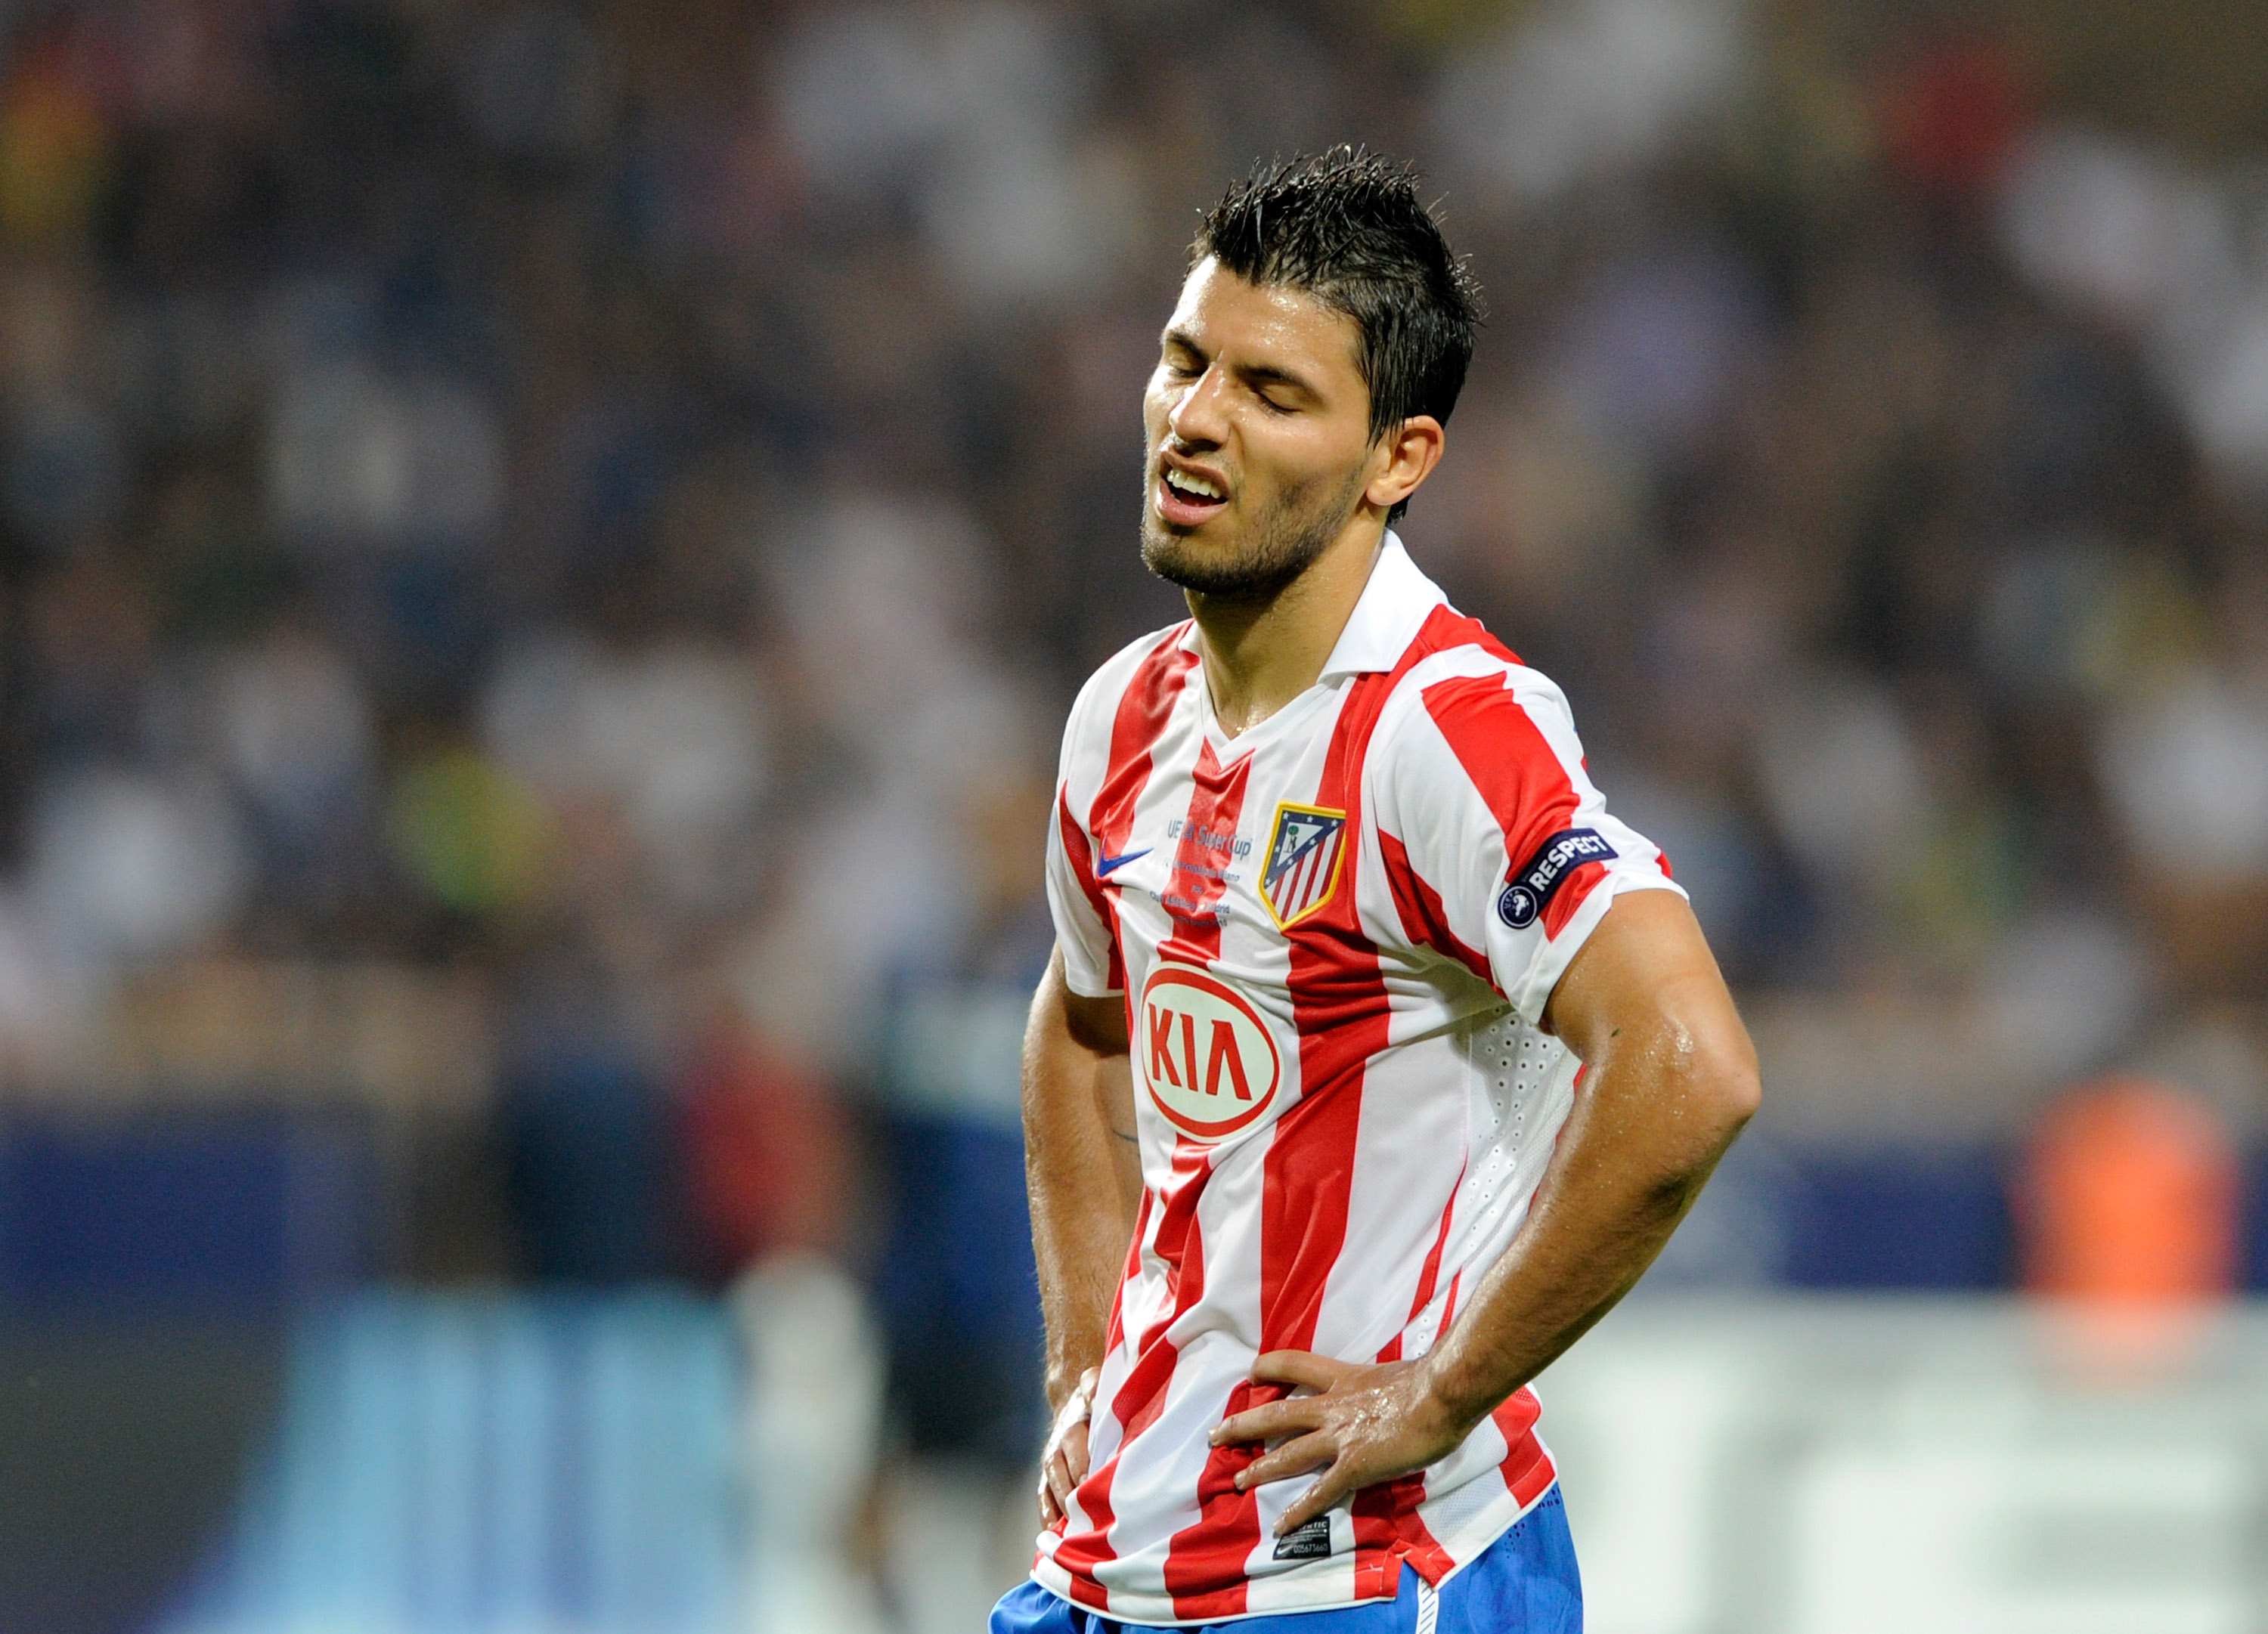 MONACO - AUGUST 27:  Sergio Aguero of Atletico Madrid dejected during the UEFA Super Cup between Inter and Atletico Madrid at Louis II Stadium on August 27, 2010 in Monaco, Monaco.  (Photo by Claudio Villa/Getty Images)